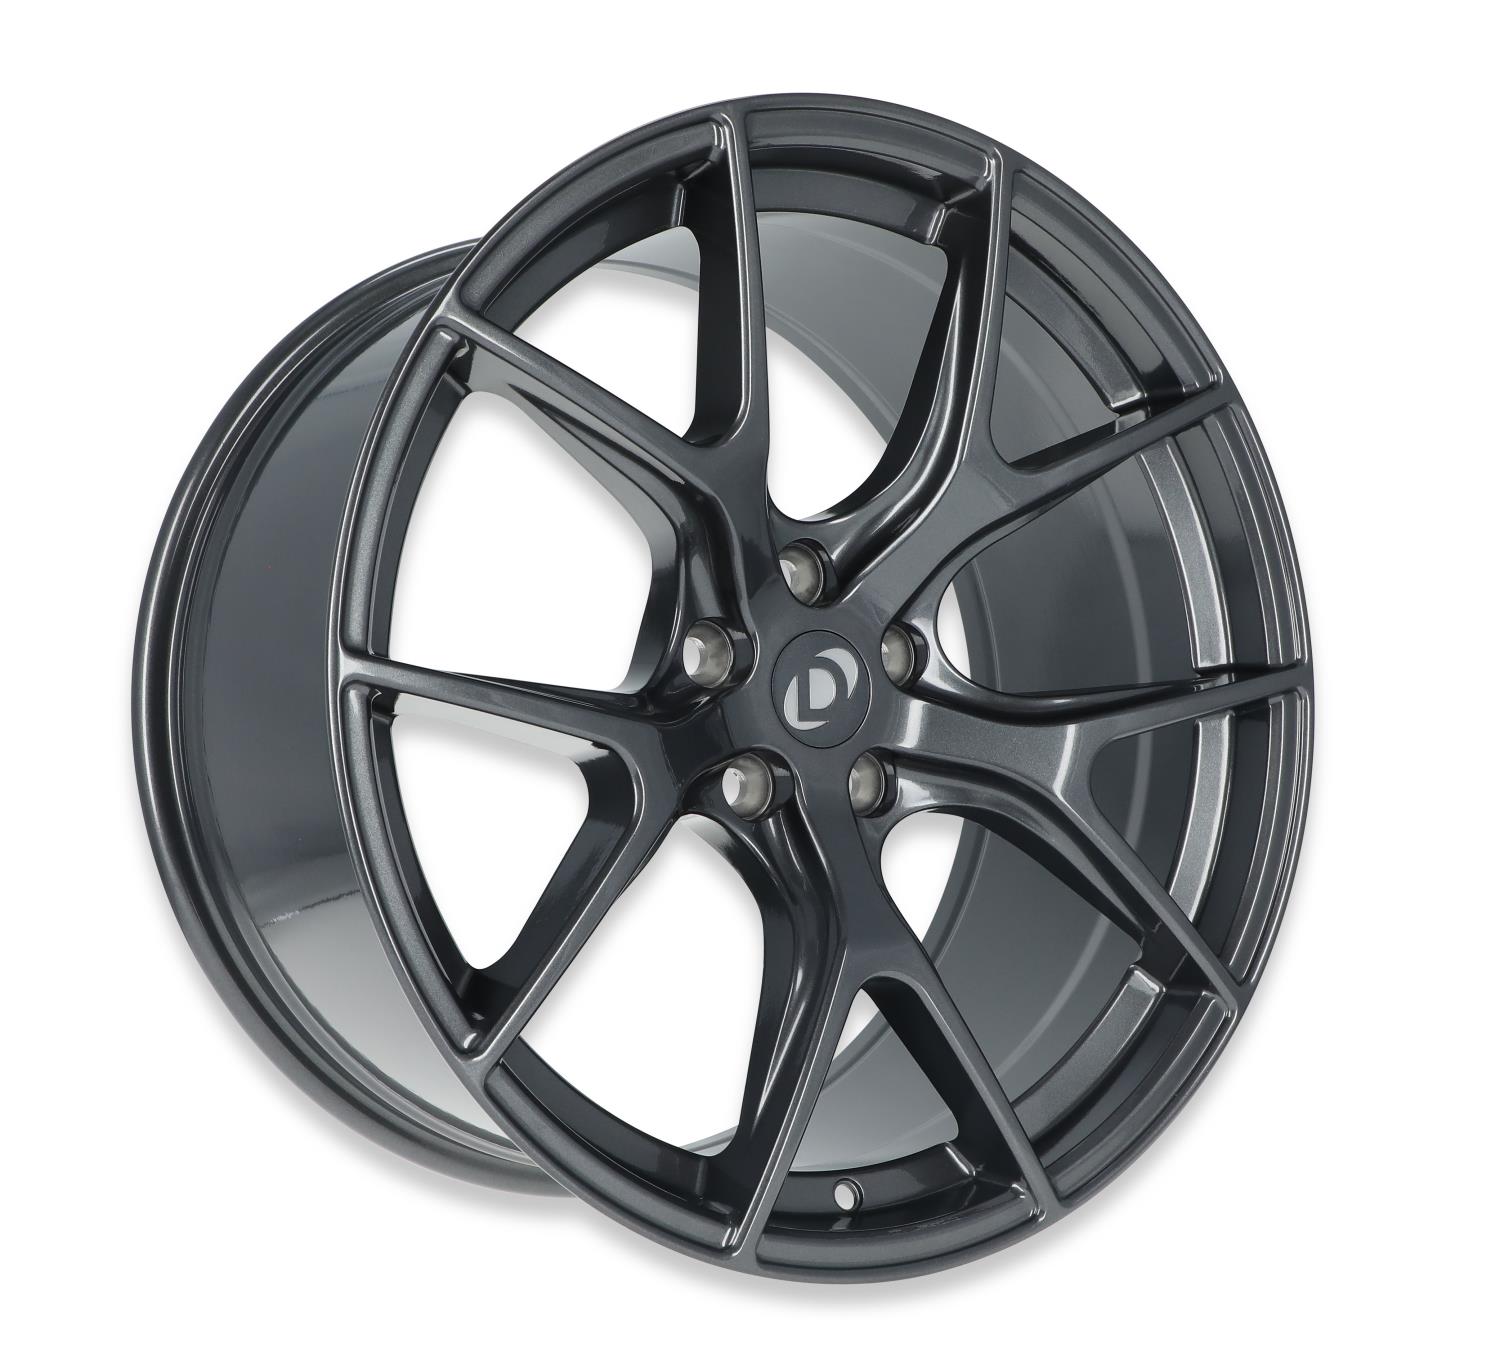 Dinan Hyper Kinetic Wheel, Size: 20x8.5", Bolt Pattern: 5x114.3mm, Backspace: 5.93" [Anthracite Finish with Clearcoat]